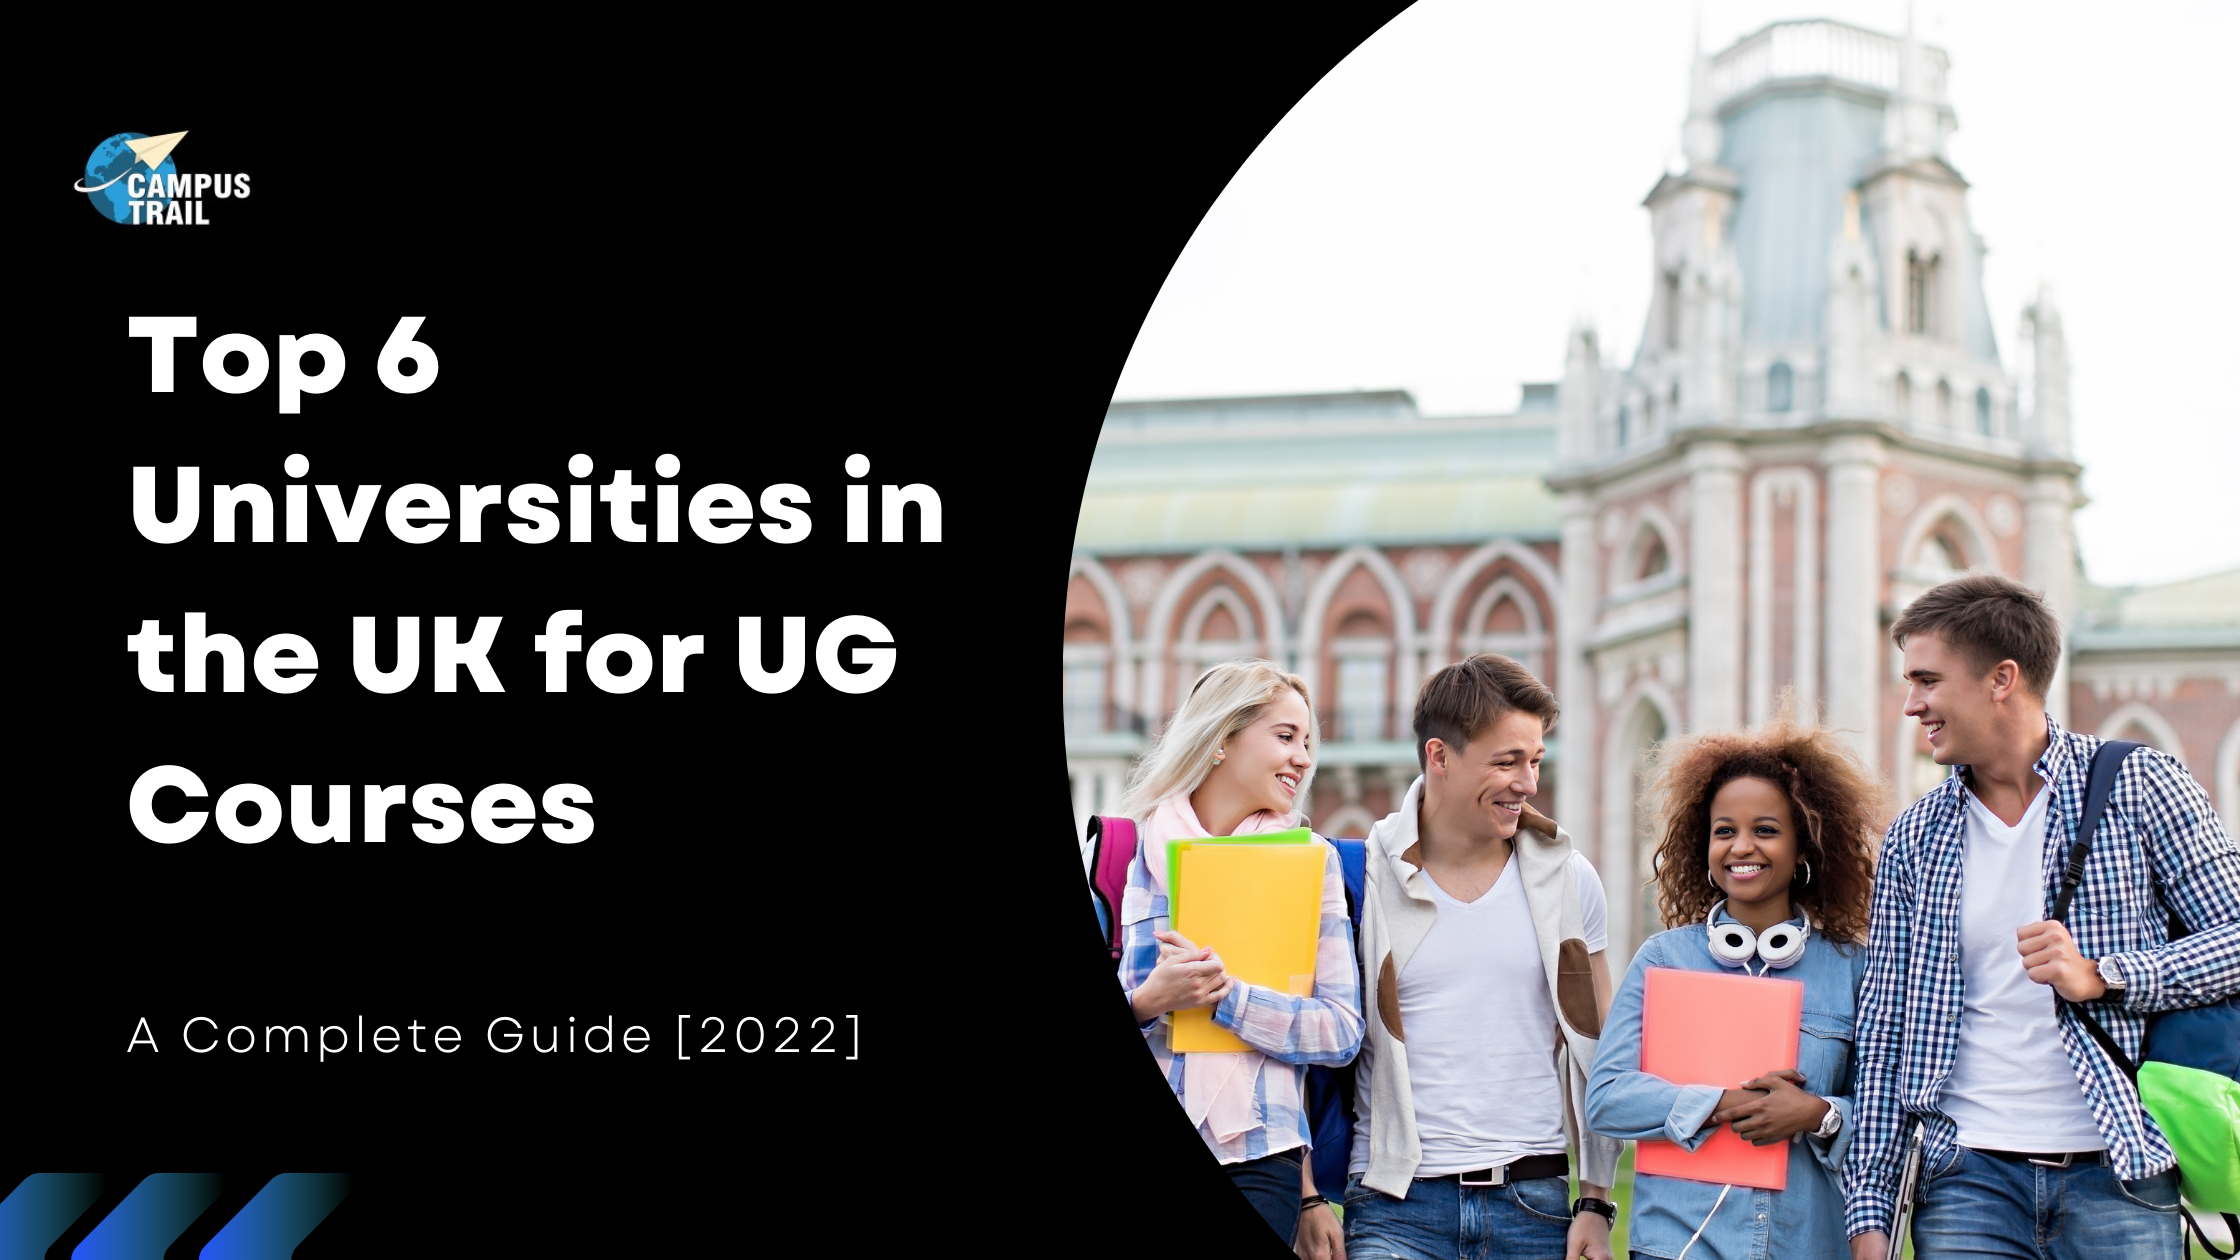 You are currently viewing Top 6 Universities in the UK for UG Courses